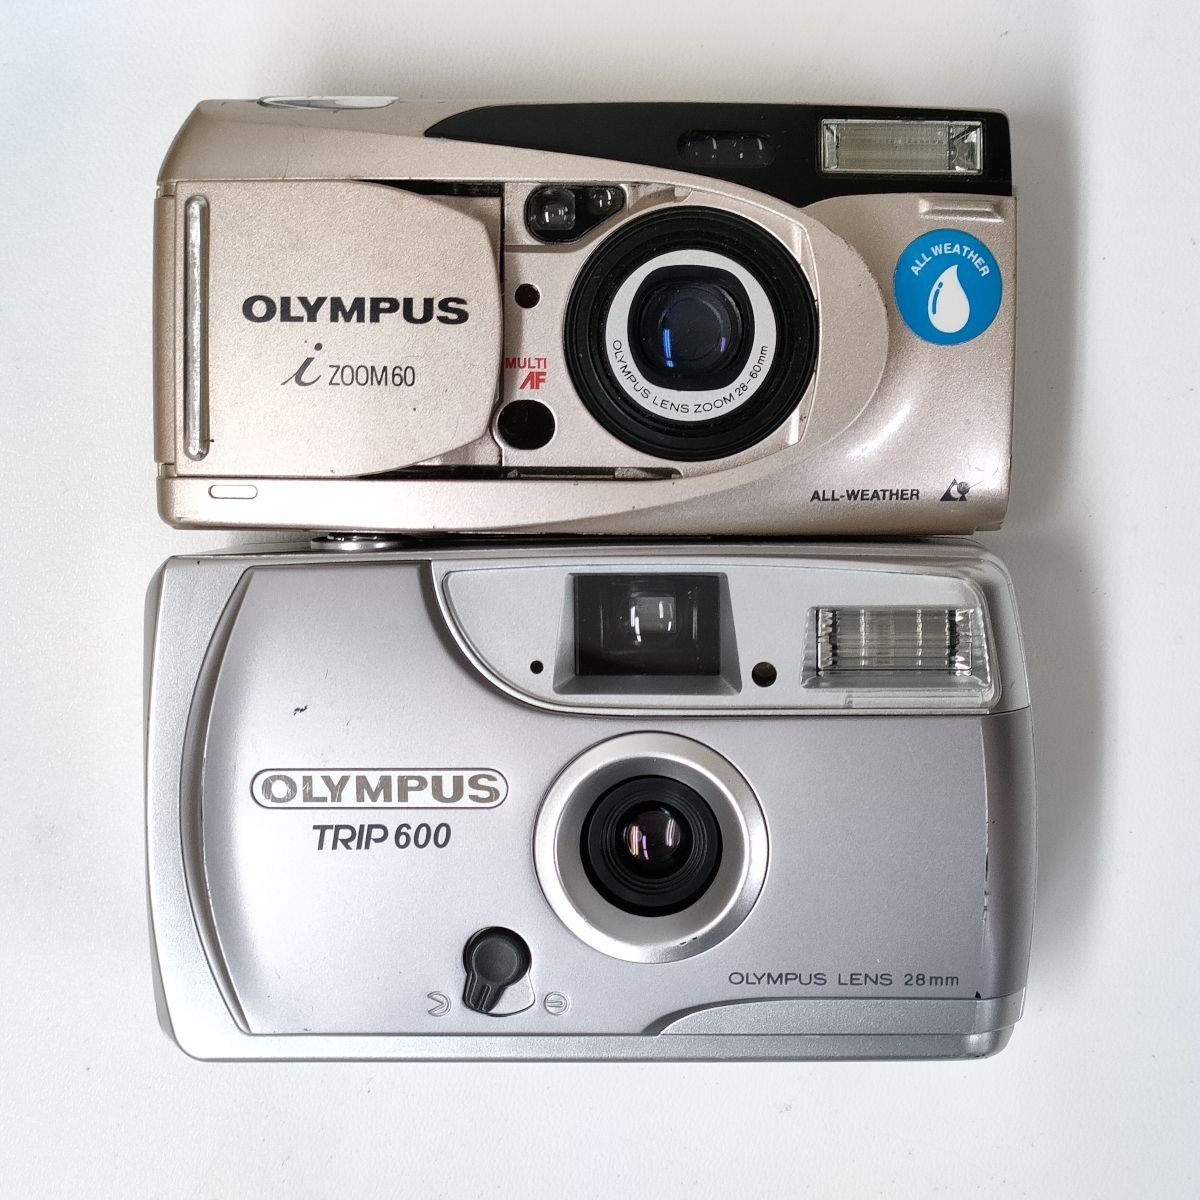 Olympus AF-10 Super , OZ 120Zoom , AFL-T , TRIP 600 他 コンパクトフィルム 15点セット まとめ ●ジャンク品 [7848TMC]_画像2